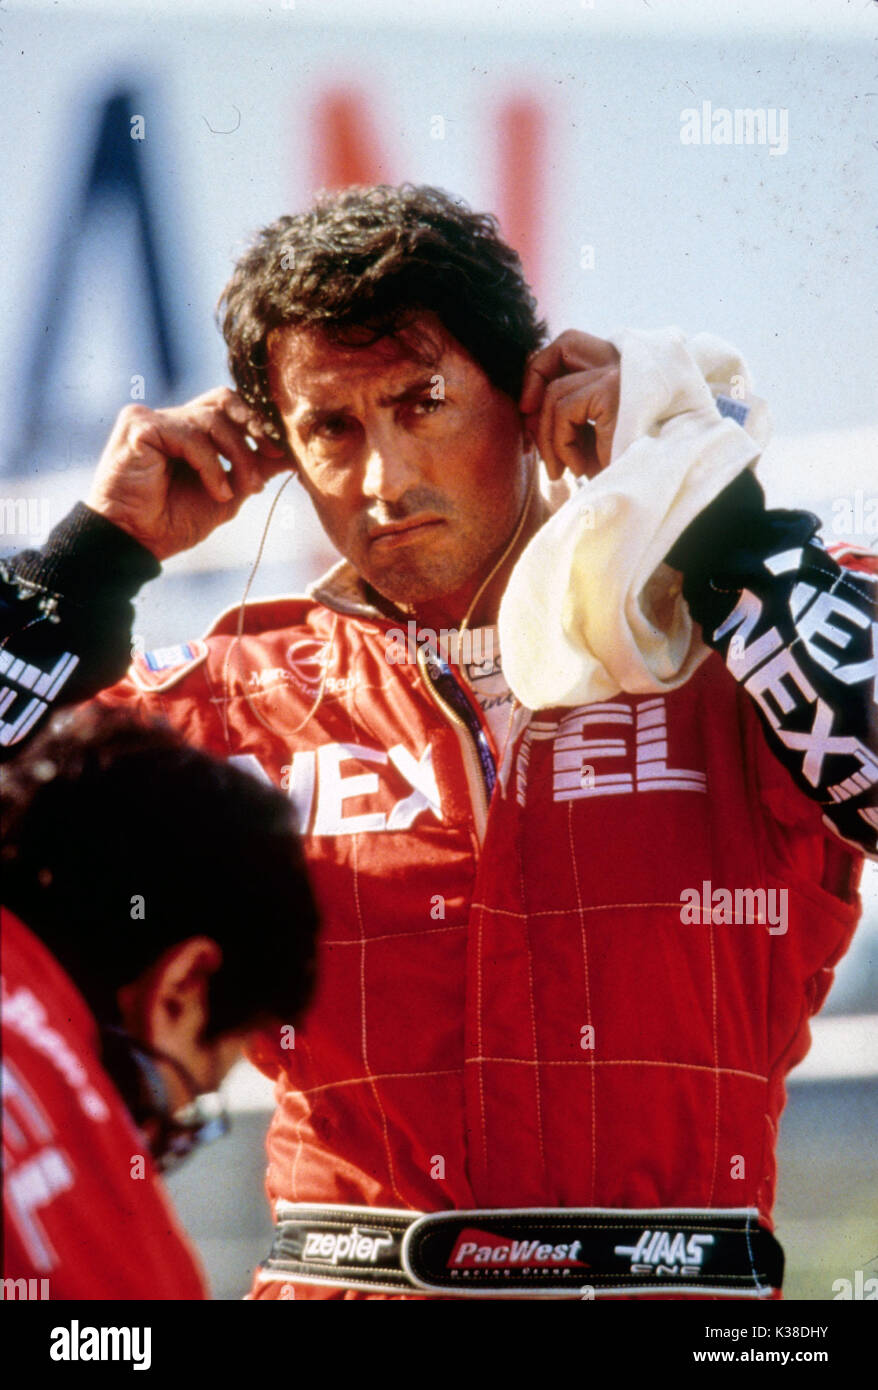 DRIVEN SYLVESTER STALLONE     Date: 2001 Stock Photo